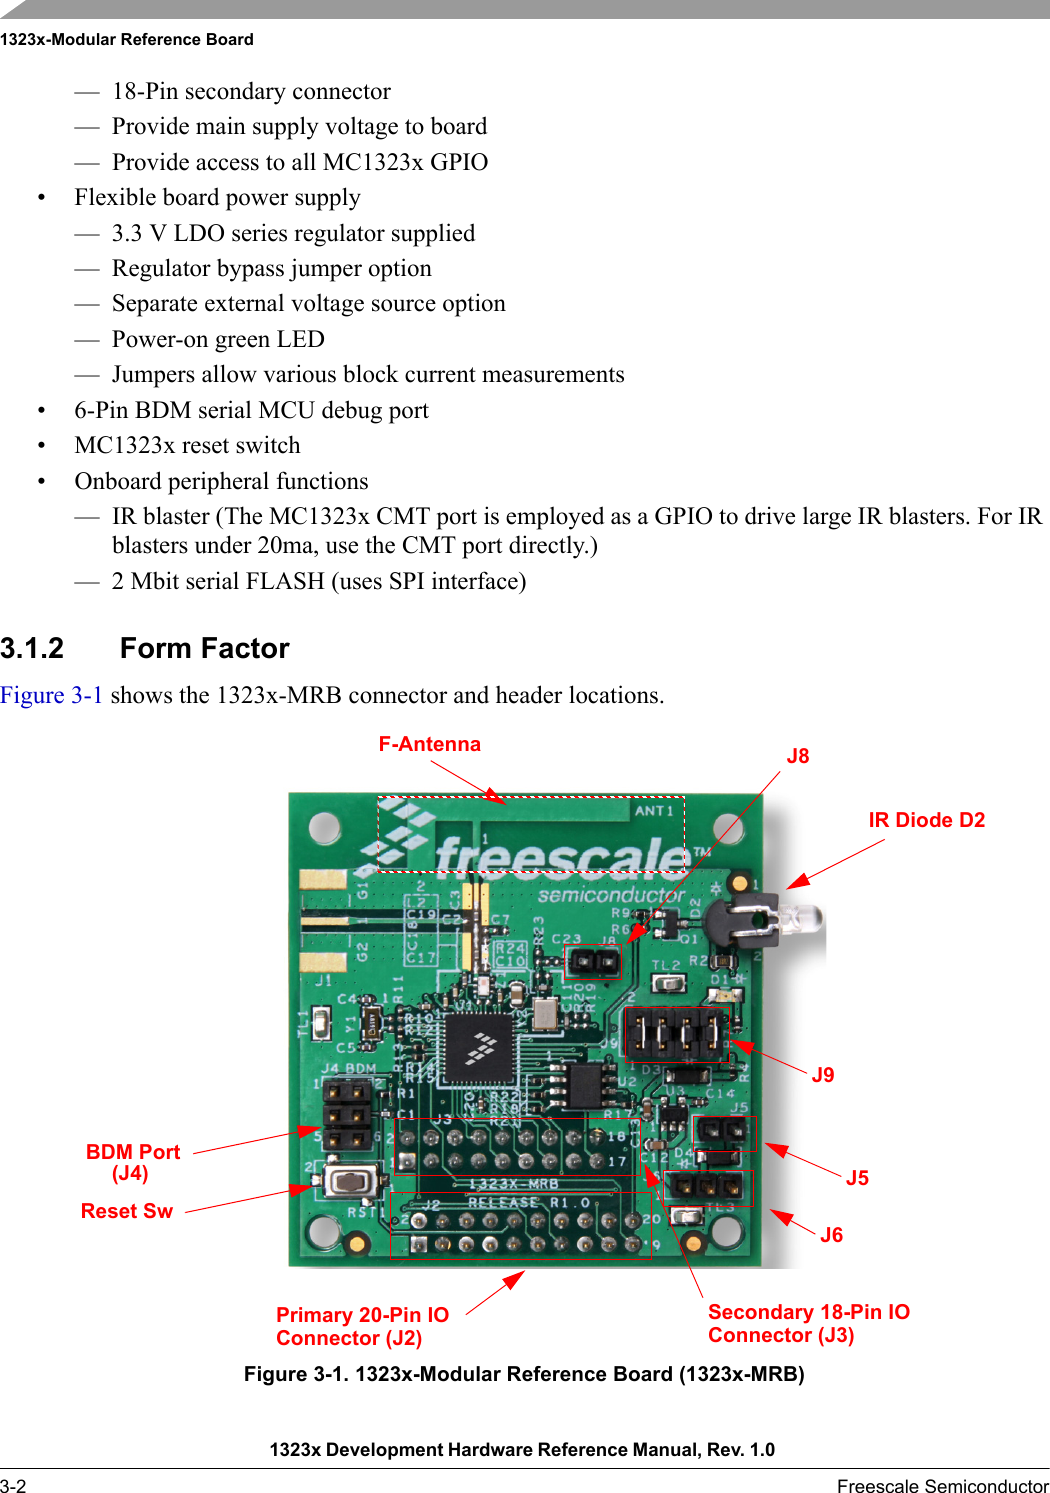 1323x-Modular Reference Board1323x Development Hardware Reference Manual, Rev. 1.0 3-2 Freescale Semiconductor— 18-Pin secondary connector— Provide main supply voltage to board— Provide access to all MC1323x GPIO• Flexible board power supply— 3.3 V LDO series regulator supplied— Regulator bypass jumper option— Separate external voltage source option— Power-on green LED— Jumpers allow various block current measurements• 6-Pin BDM serial MCU debug port• MC1323x reset switch• Onboard peripheral functions— IR blaster (The MC1323x CMT port is employed as a GPIO to drive large IR blasters. For IR blasters under 20ma, use the CMT port directly.)— 2 Mbit serial FLASH (uses SPI interface)3.1.2 Form FactorFigure 3-1 shows the 1323x-MRB connector and header locations.Figure 3-1. 1323x-Modular Reference Board (1323x-MRB)BDM PortReset SwPrimary 20-Pin IOConnector (J2)J6(J4) J5Secondary 18-Pin IOConnector (J3)J9J8F-AntennaIR Diode D2